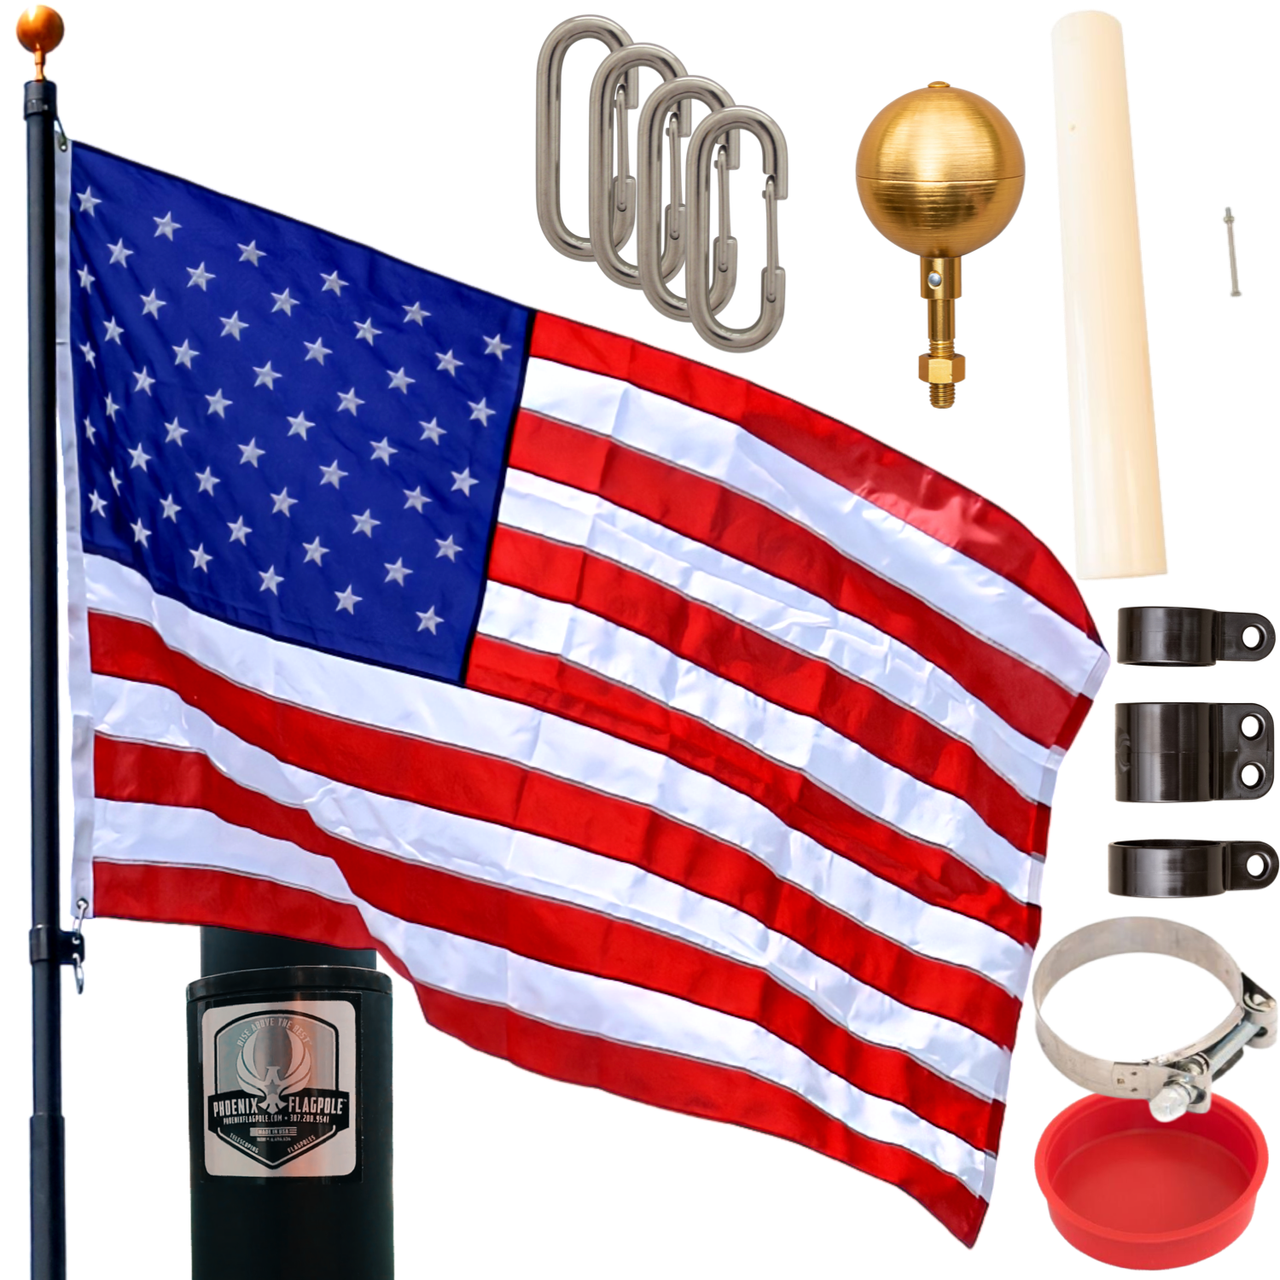 Limited Special Edition Historic Bronze Phoenix Telescoping Flagpole Kit